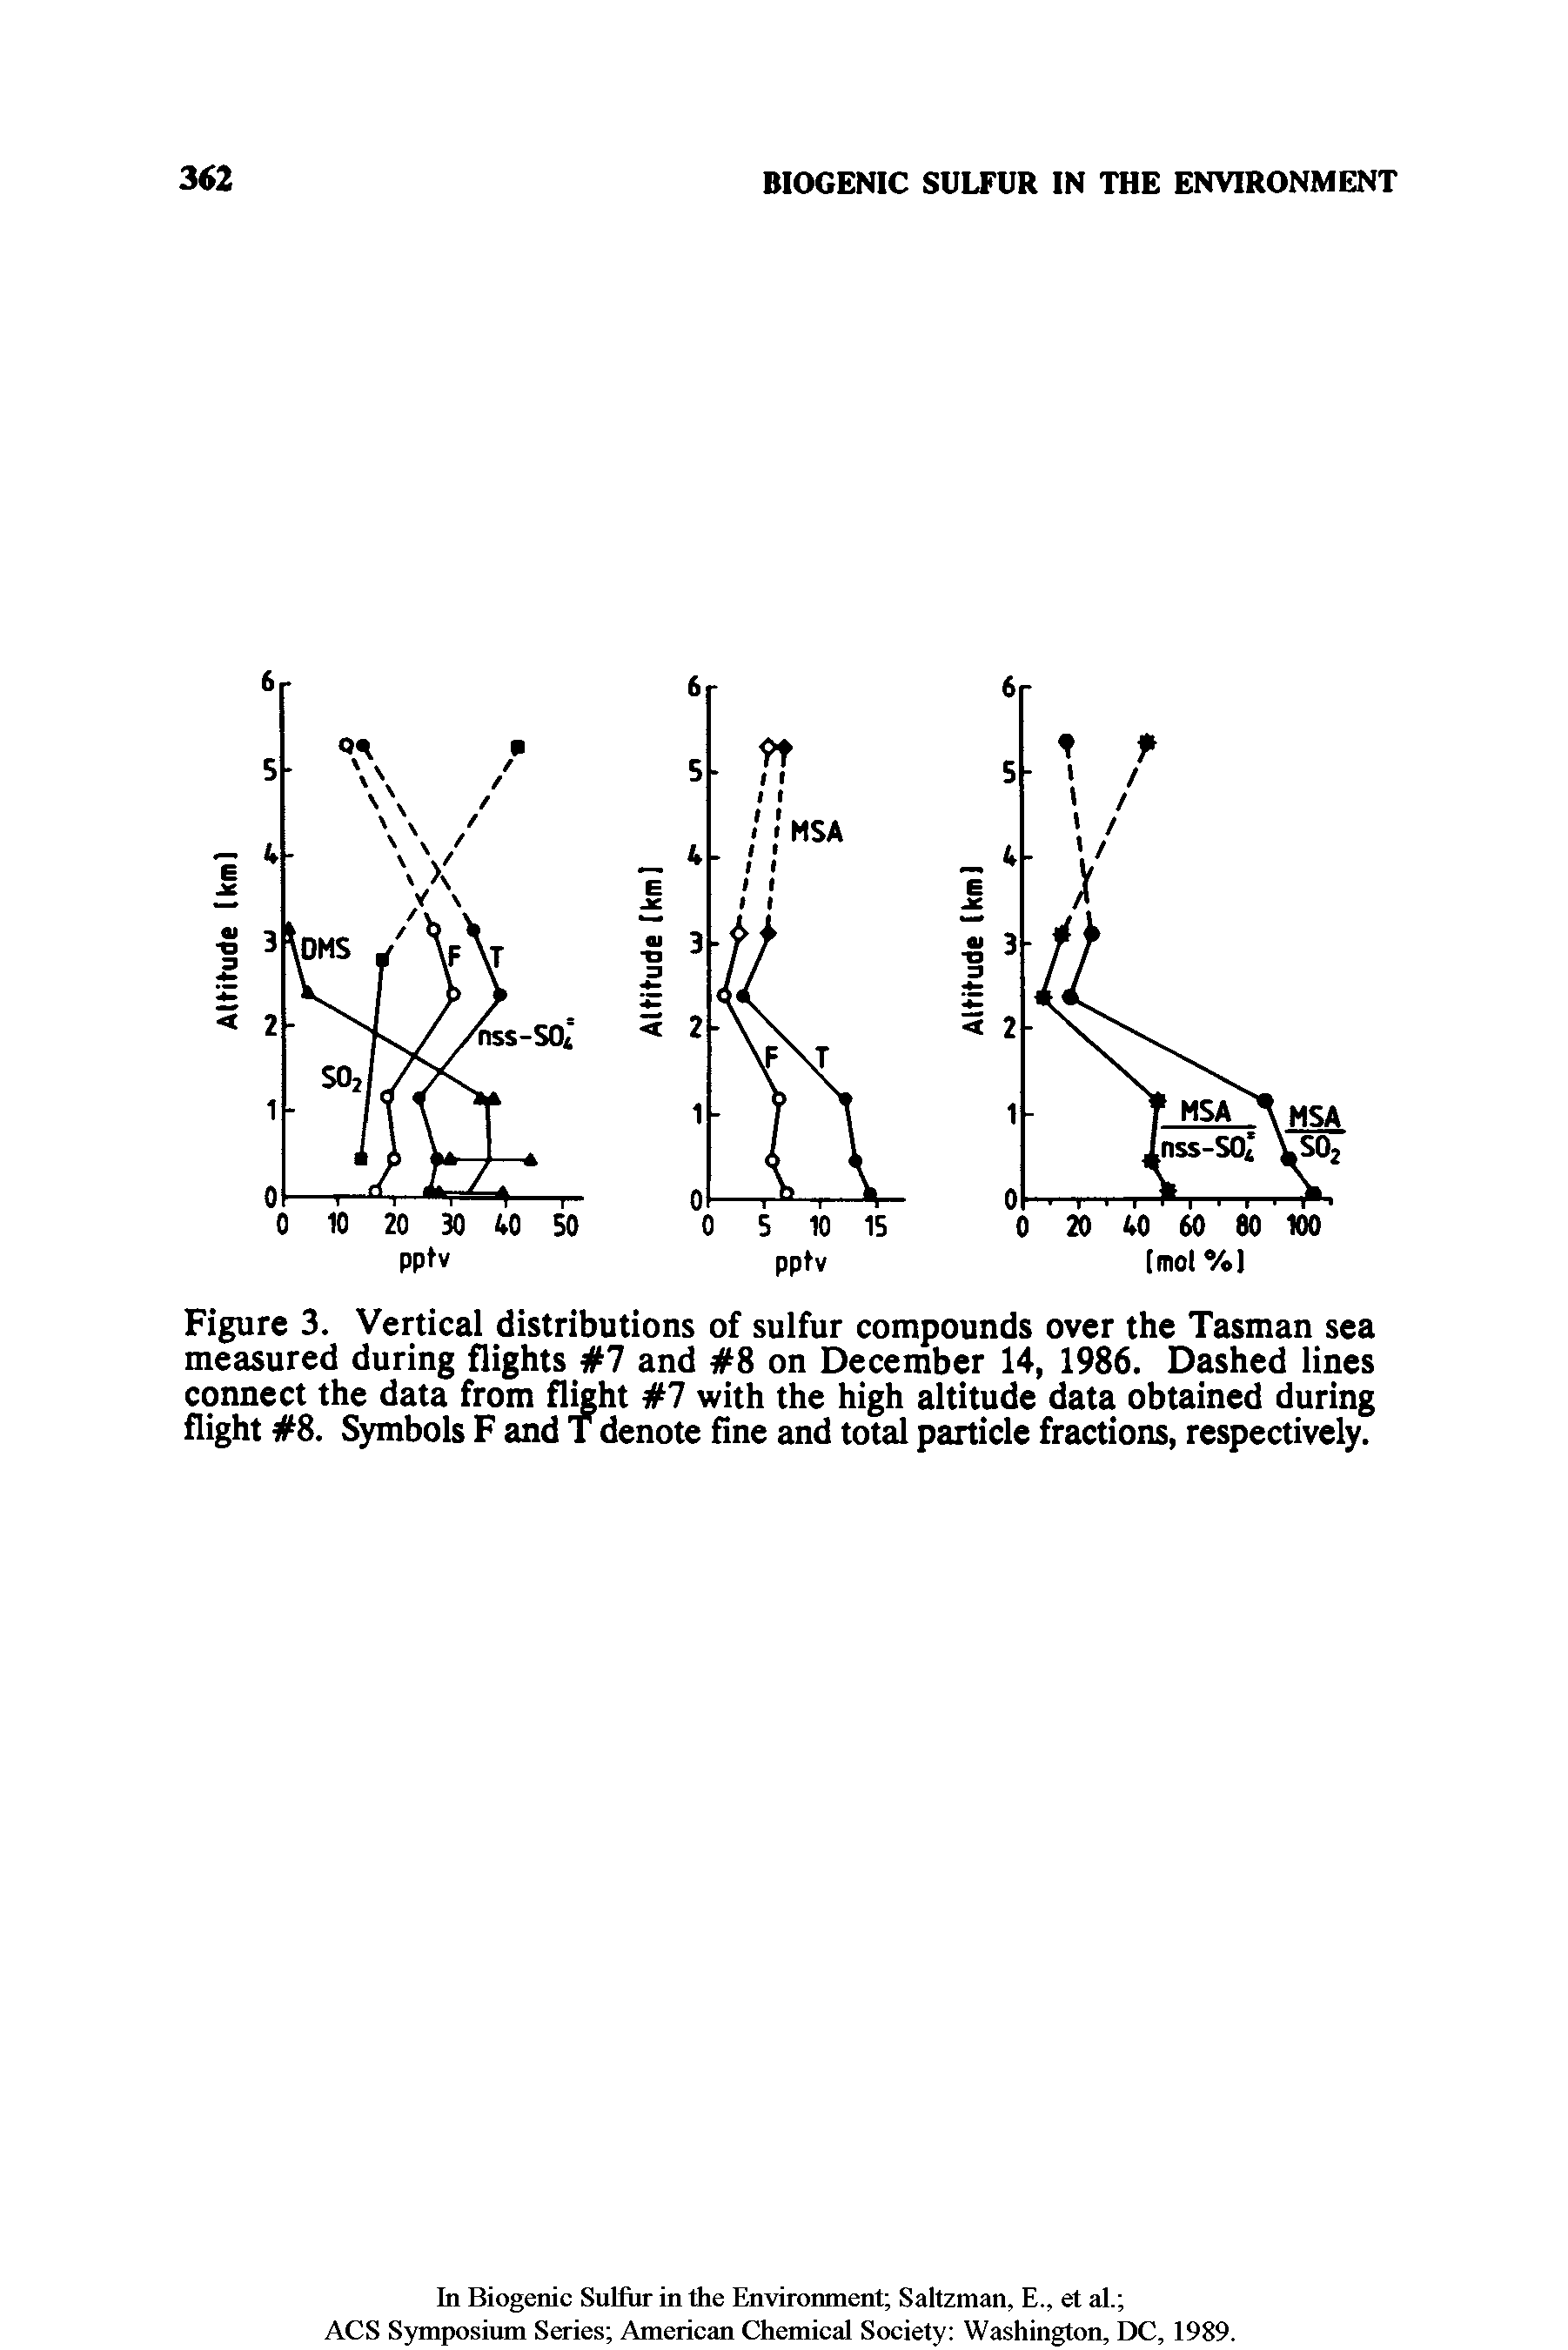 Figure 3. Vertical distributions of sulfur compounds over the Tasman sea measured during flights 7 and 8 on December 14, 1986. Dashed lines connect the data from flight 7 with the high altitude data obtained during flight 8. Symbols F and T denote fine and total particle fractions, respectively.